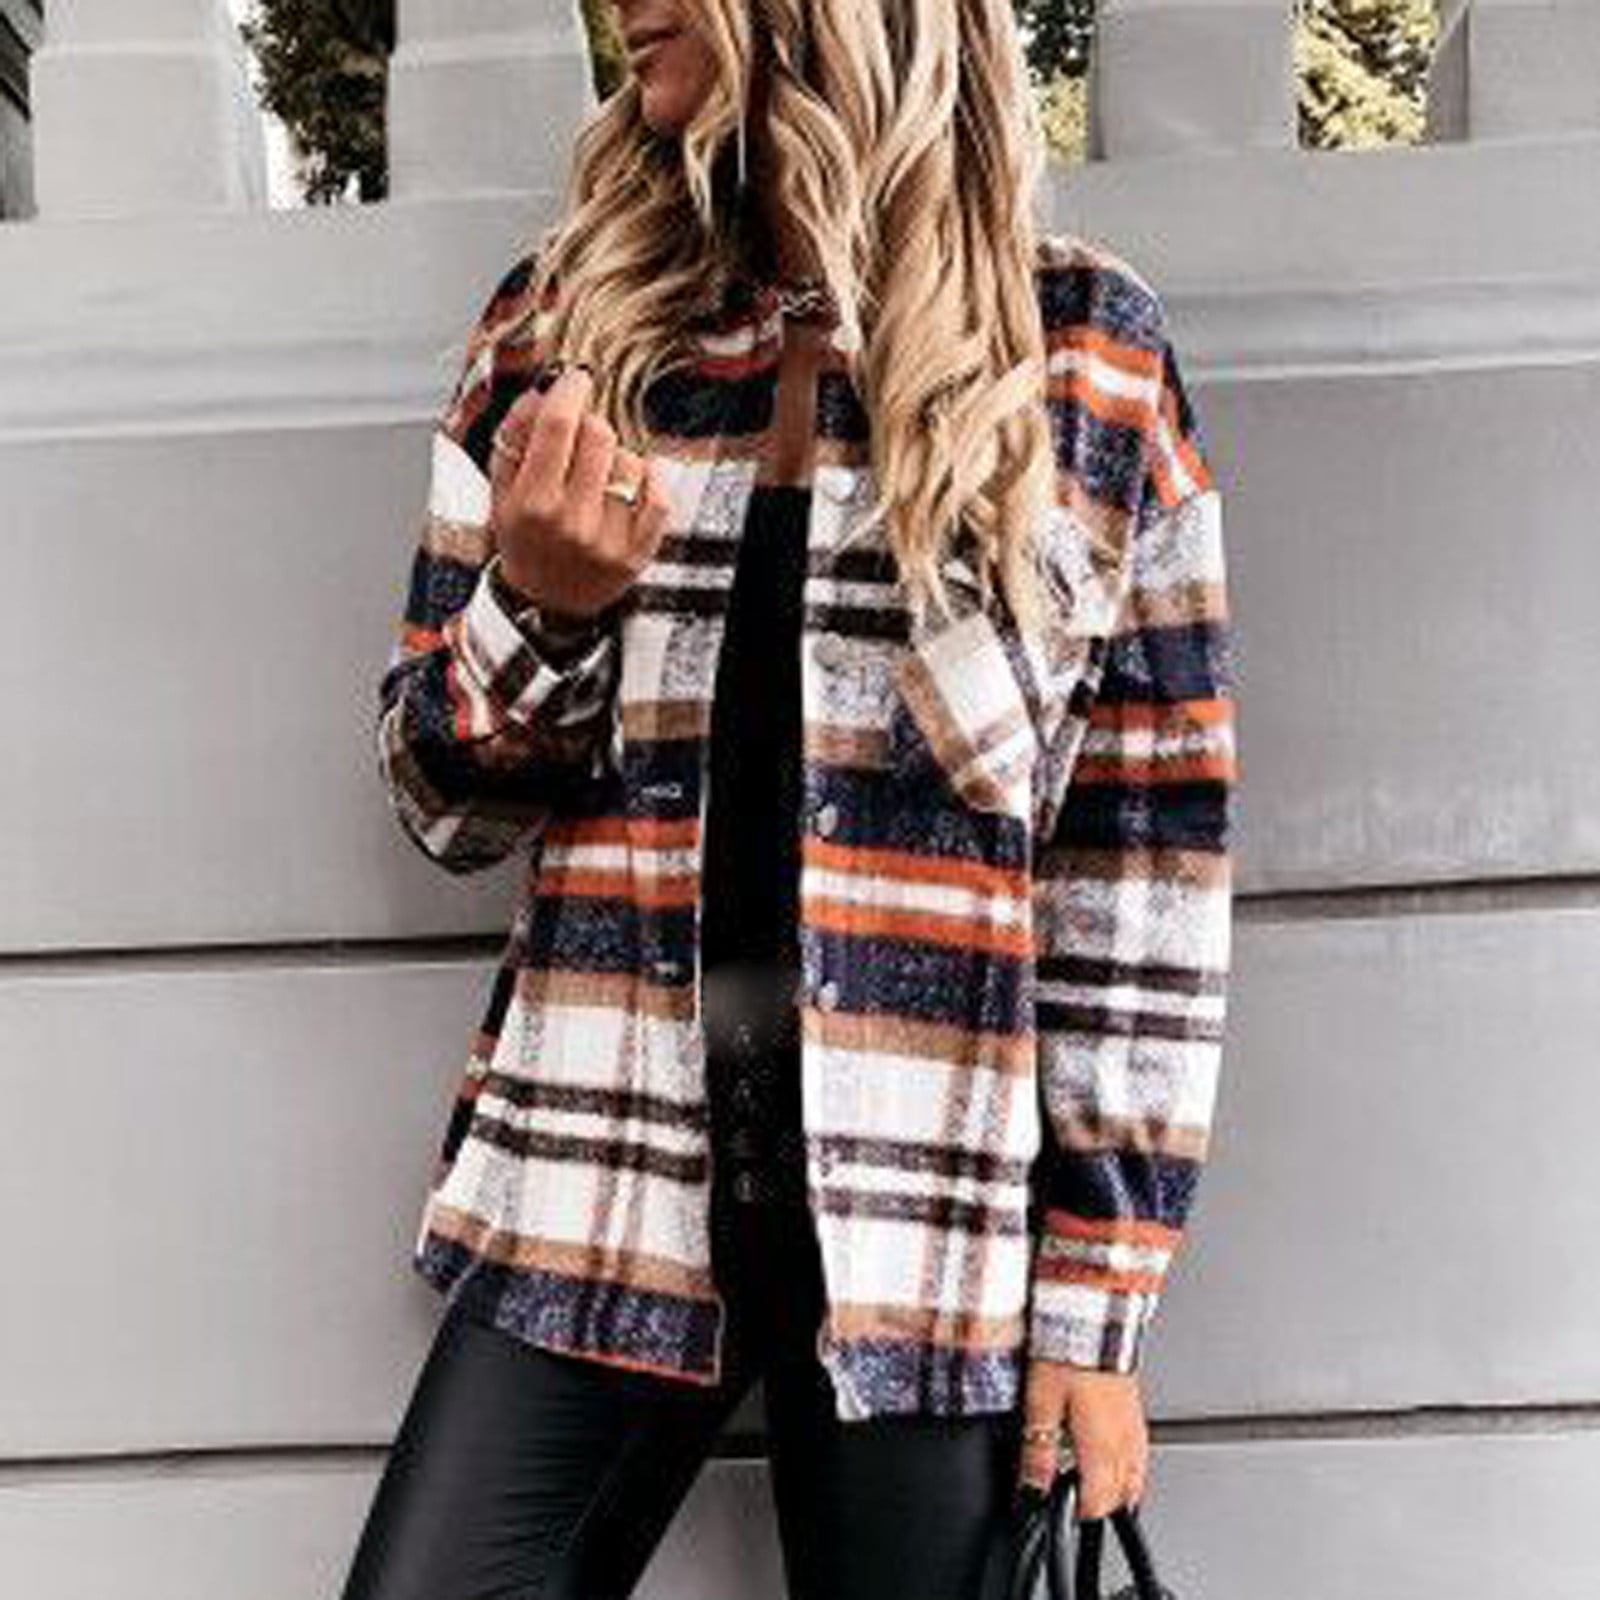 Plaid Jacket for Women Summer Wear Casual Style Breathable Coat Half Sleeve Blazer Breathable Tops Outwear